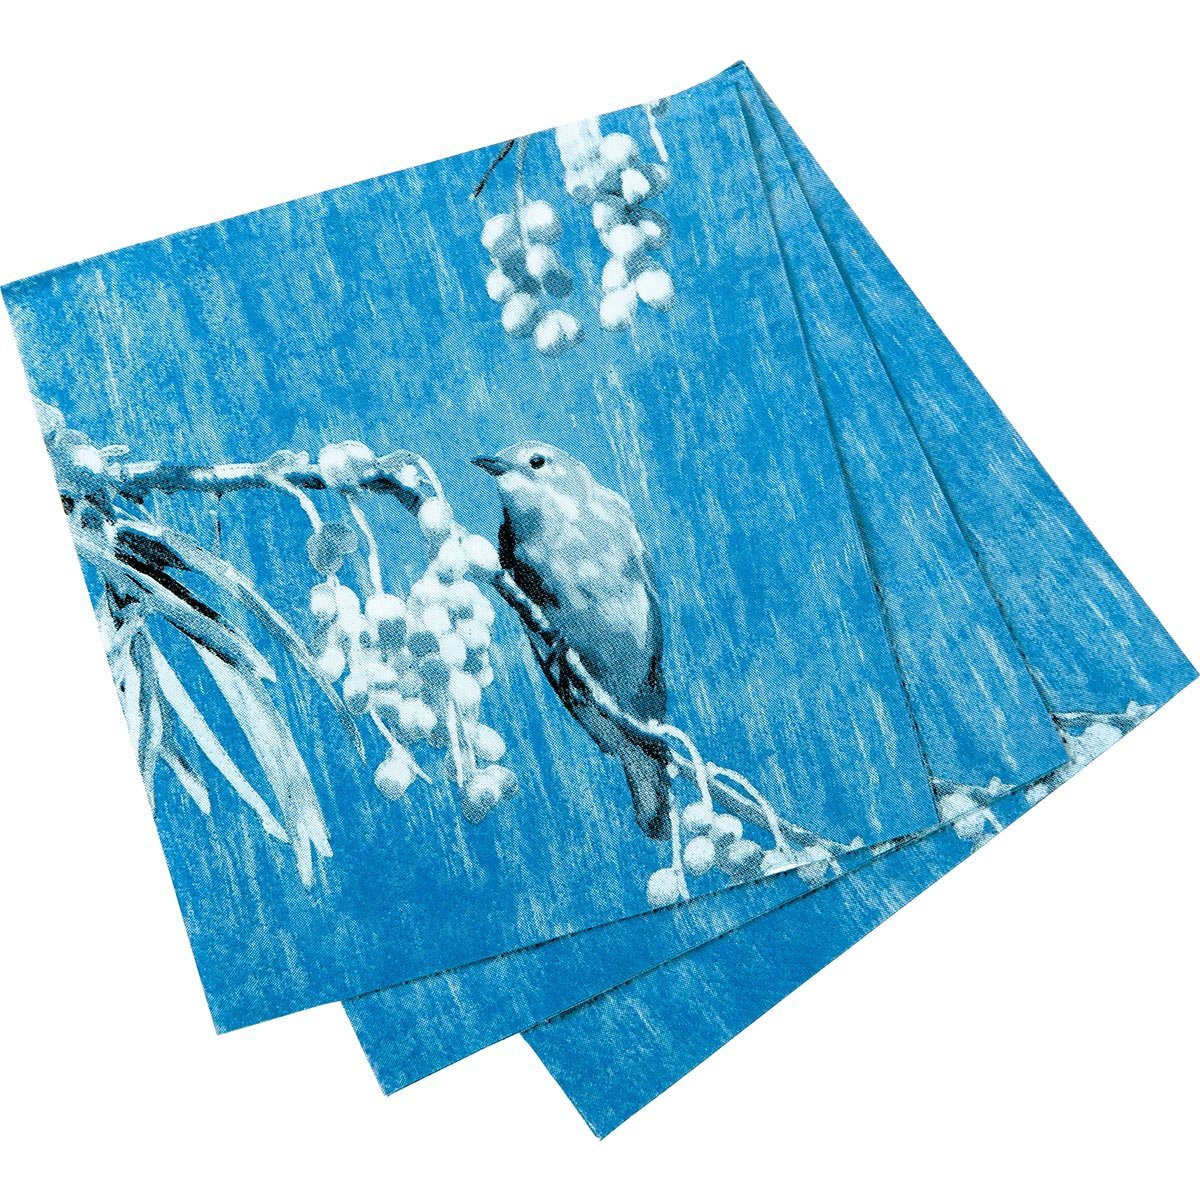 Chintz Bird Paper Cocktail Napkins (Pack of 20) Paper Cocktail Napkin - rockflowerpaper